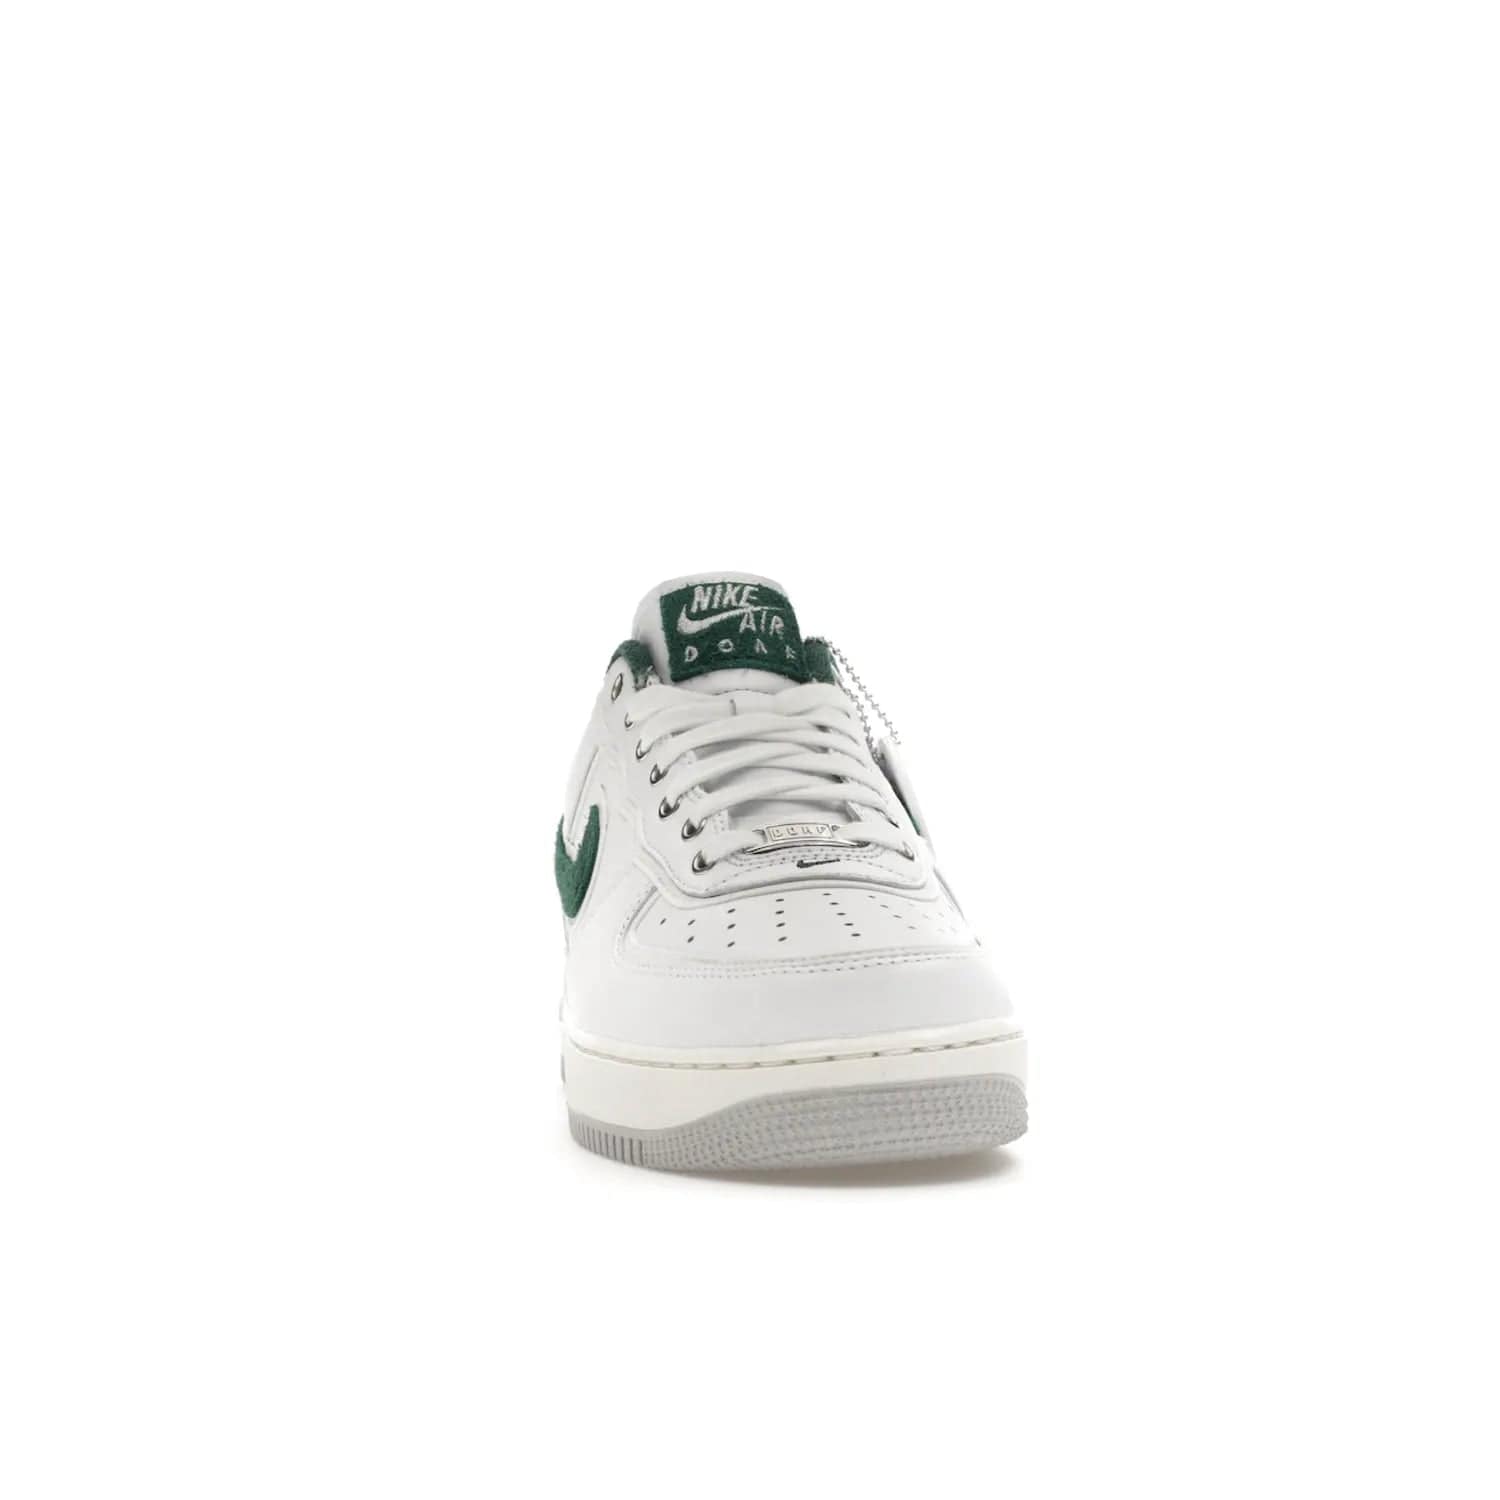 Nike Air Force 1 Low '07 Premium University of Oregon PE - Image 9 - Only at www.BallersClubKickz.com - The Nike Air Force 1 Low '07 Premium. Special Oregon University colorway. White base with green and sail accents. Cushioned rubber midsole. Comfort and style. Support your school!